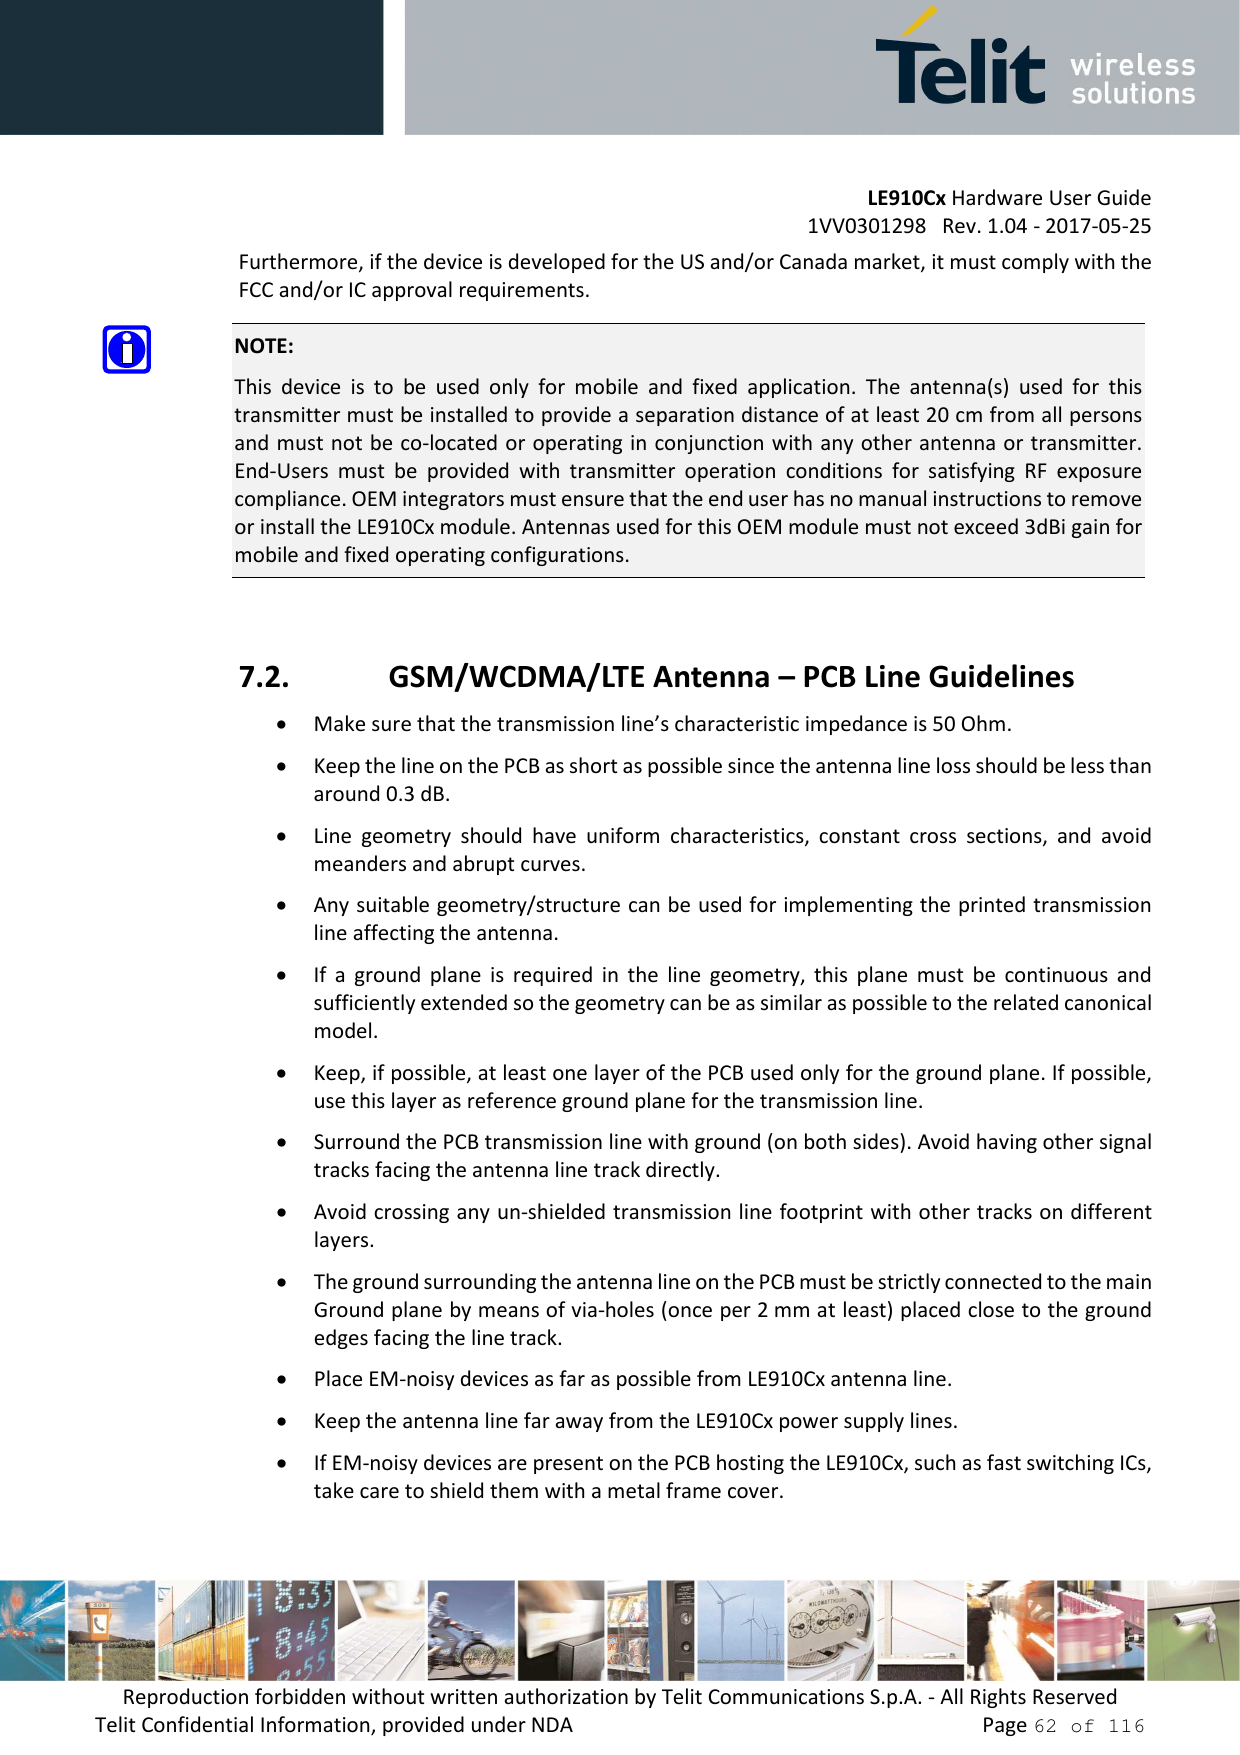         LE910Cx Hardware User Guide 1VV0301298   Rev. 1.04 - 2017-05-25 Reproduction forbidden without written authorization by Telit Communications S.p.A. - All Rights Reserved Telit Confidential Information, provided under NDA                 Page 62 of 116 Furthermore, if the device is developed for the US and/or Canada market, it must comply with the FCC and/or IC approval requirements.  NOTE: This  device  is  to  be  used  only  for  mobile  and  fixed  application.  The  antenna(s)  used  for  this transmitter must be installed to provide a separation distance of at least 20 cm from all persons and must not be co-located or operating in conjunction with any other antenna or transmitter. End-Users  must  be  provided  with  transmitter  operation  conditions  for  satisfying  RF  exposure compliance. OEM integrators must ensure that the end user has no manual instructions to remove or install the LE910Cx module. Antennas used for this OEM module must not exceed 3dBi gain for mobile and fixed operating configurations.  7.2. GSM/WCDMA/LTE Antenna – PCB Line Guidelines • Make sure that the transmission line’s characteristic impedance is 50 Ohm. • Keep the line on the PCB as short as possible since the antenna line loss should be less than around 0.3 dB. • Line  geometry  should  have  uniform  characteristics,  constant  cross  sections,  and  avoid meanders and abrupt curves. • Any suitable geometry/structure can be used for implementing the printed transmission line affecting the antenna. • If  a  ground  plane  is  required  in  the  line  geometry,  this  plane  must  be  continuous  and sufficiently extended so the geometry can be as similar as possible to the related canonical model. • Keep, if possible, at least one layer of the PCB used only for the ground plane. If possible, use this layer as reference ground plane for the transmission line. • Surround the PCB transmission line with ground (on both sides). Avoid having other signal tracks facing the antenna line track directly. • Avoid crossing any un-shielded transmission line footprint with other tracks on different layers. • The ground surrounding the antenna line on the PCB must be strictly connected to the main Ground plane by means of via-holes (once per 2 mm at least) placed close to the ground edges facing the line track. • Place EM-noisy devices as far as possible from LE910Cx antenna line. • Keep the antenna line far away from the LE910Cx power supply lines. • If EM-noisy devices are present on the PCB hosting the LE910Cx, such as fast switching ICs, take care to shield them with a metal frame cover. 